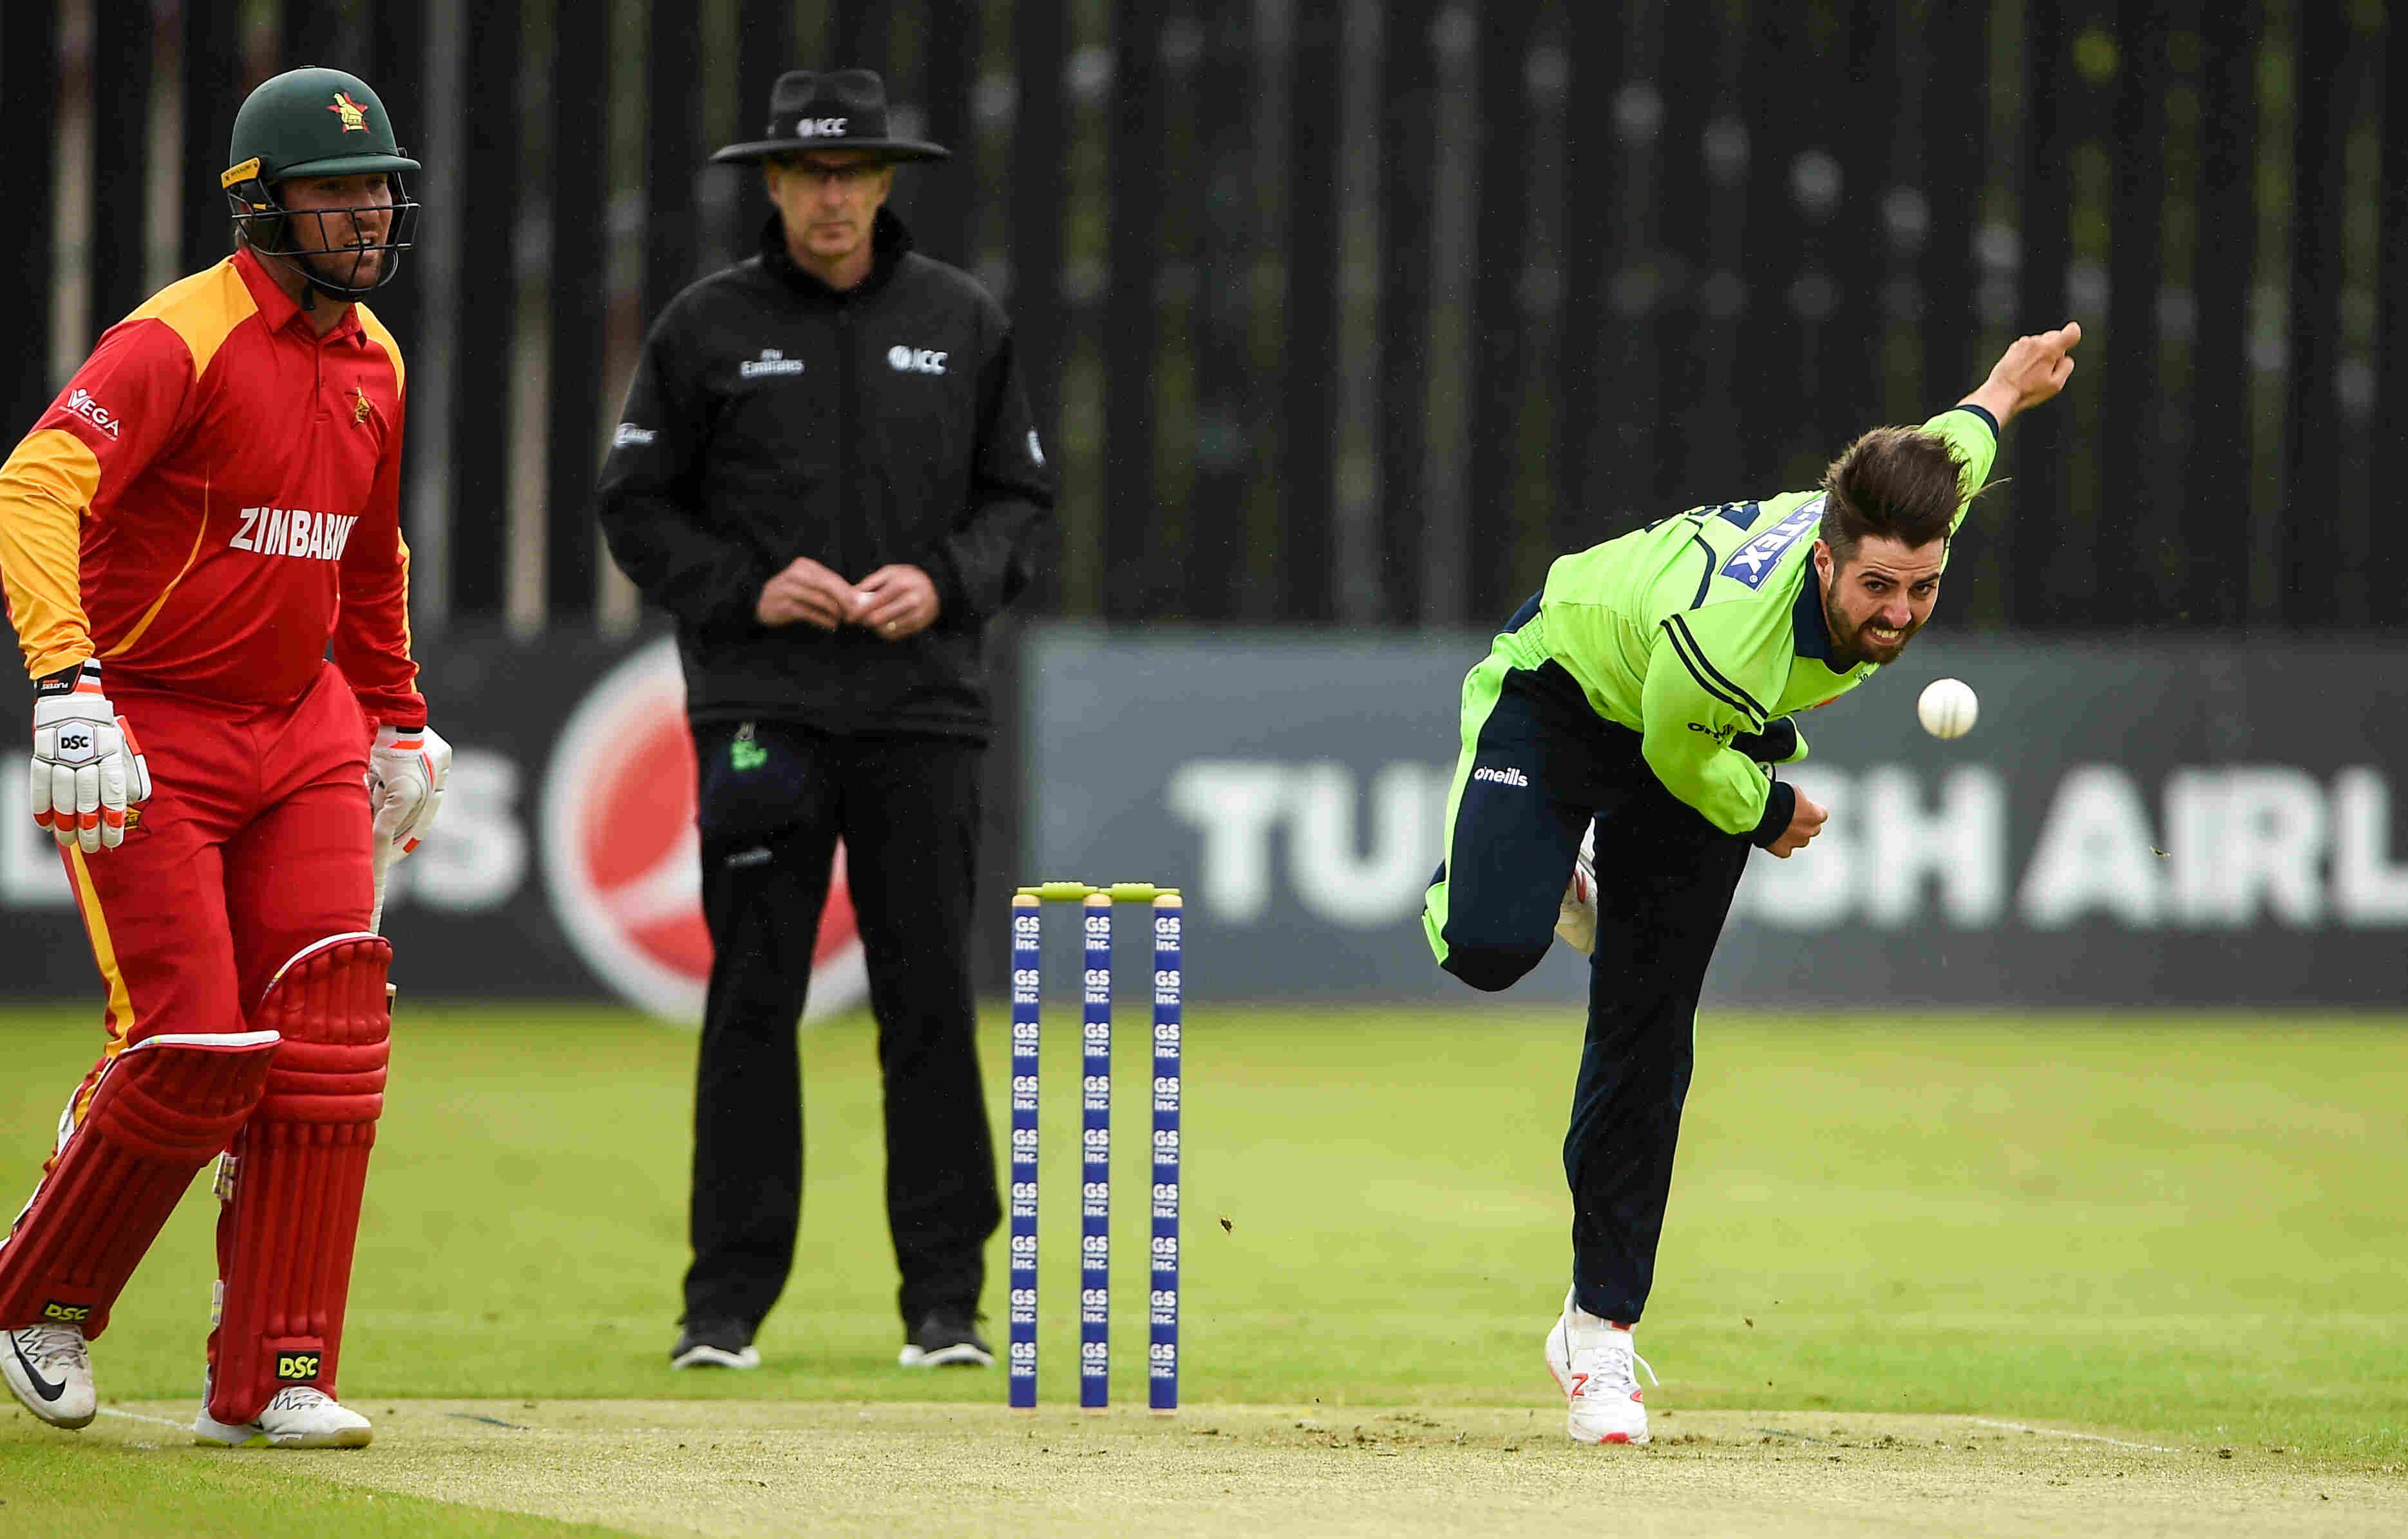 ZIM vs IRE, 1st T20I: Preview, Prediction and Fantasy Tips